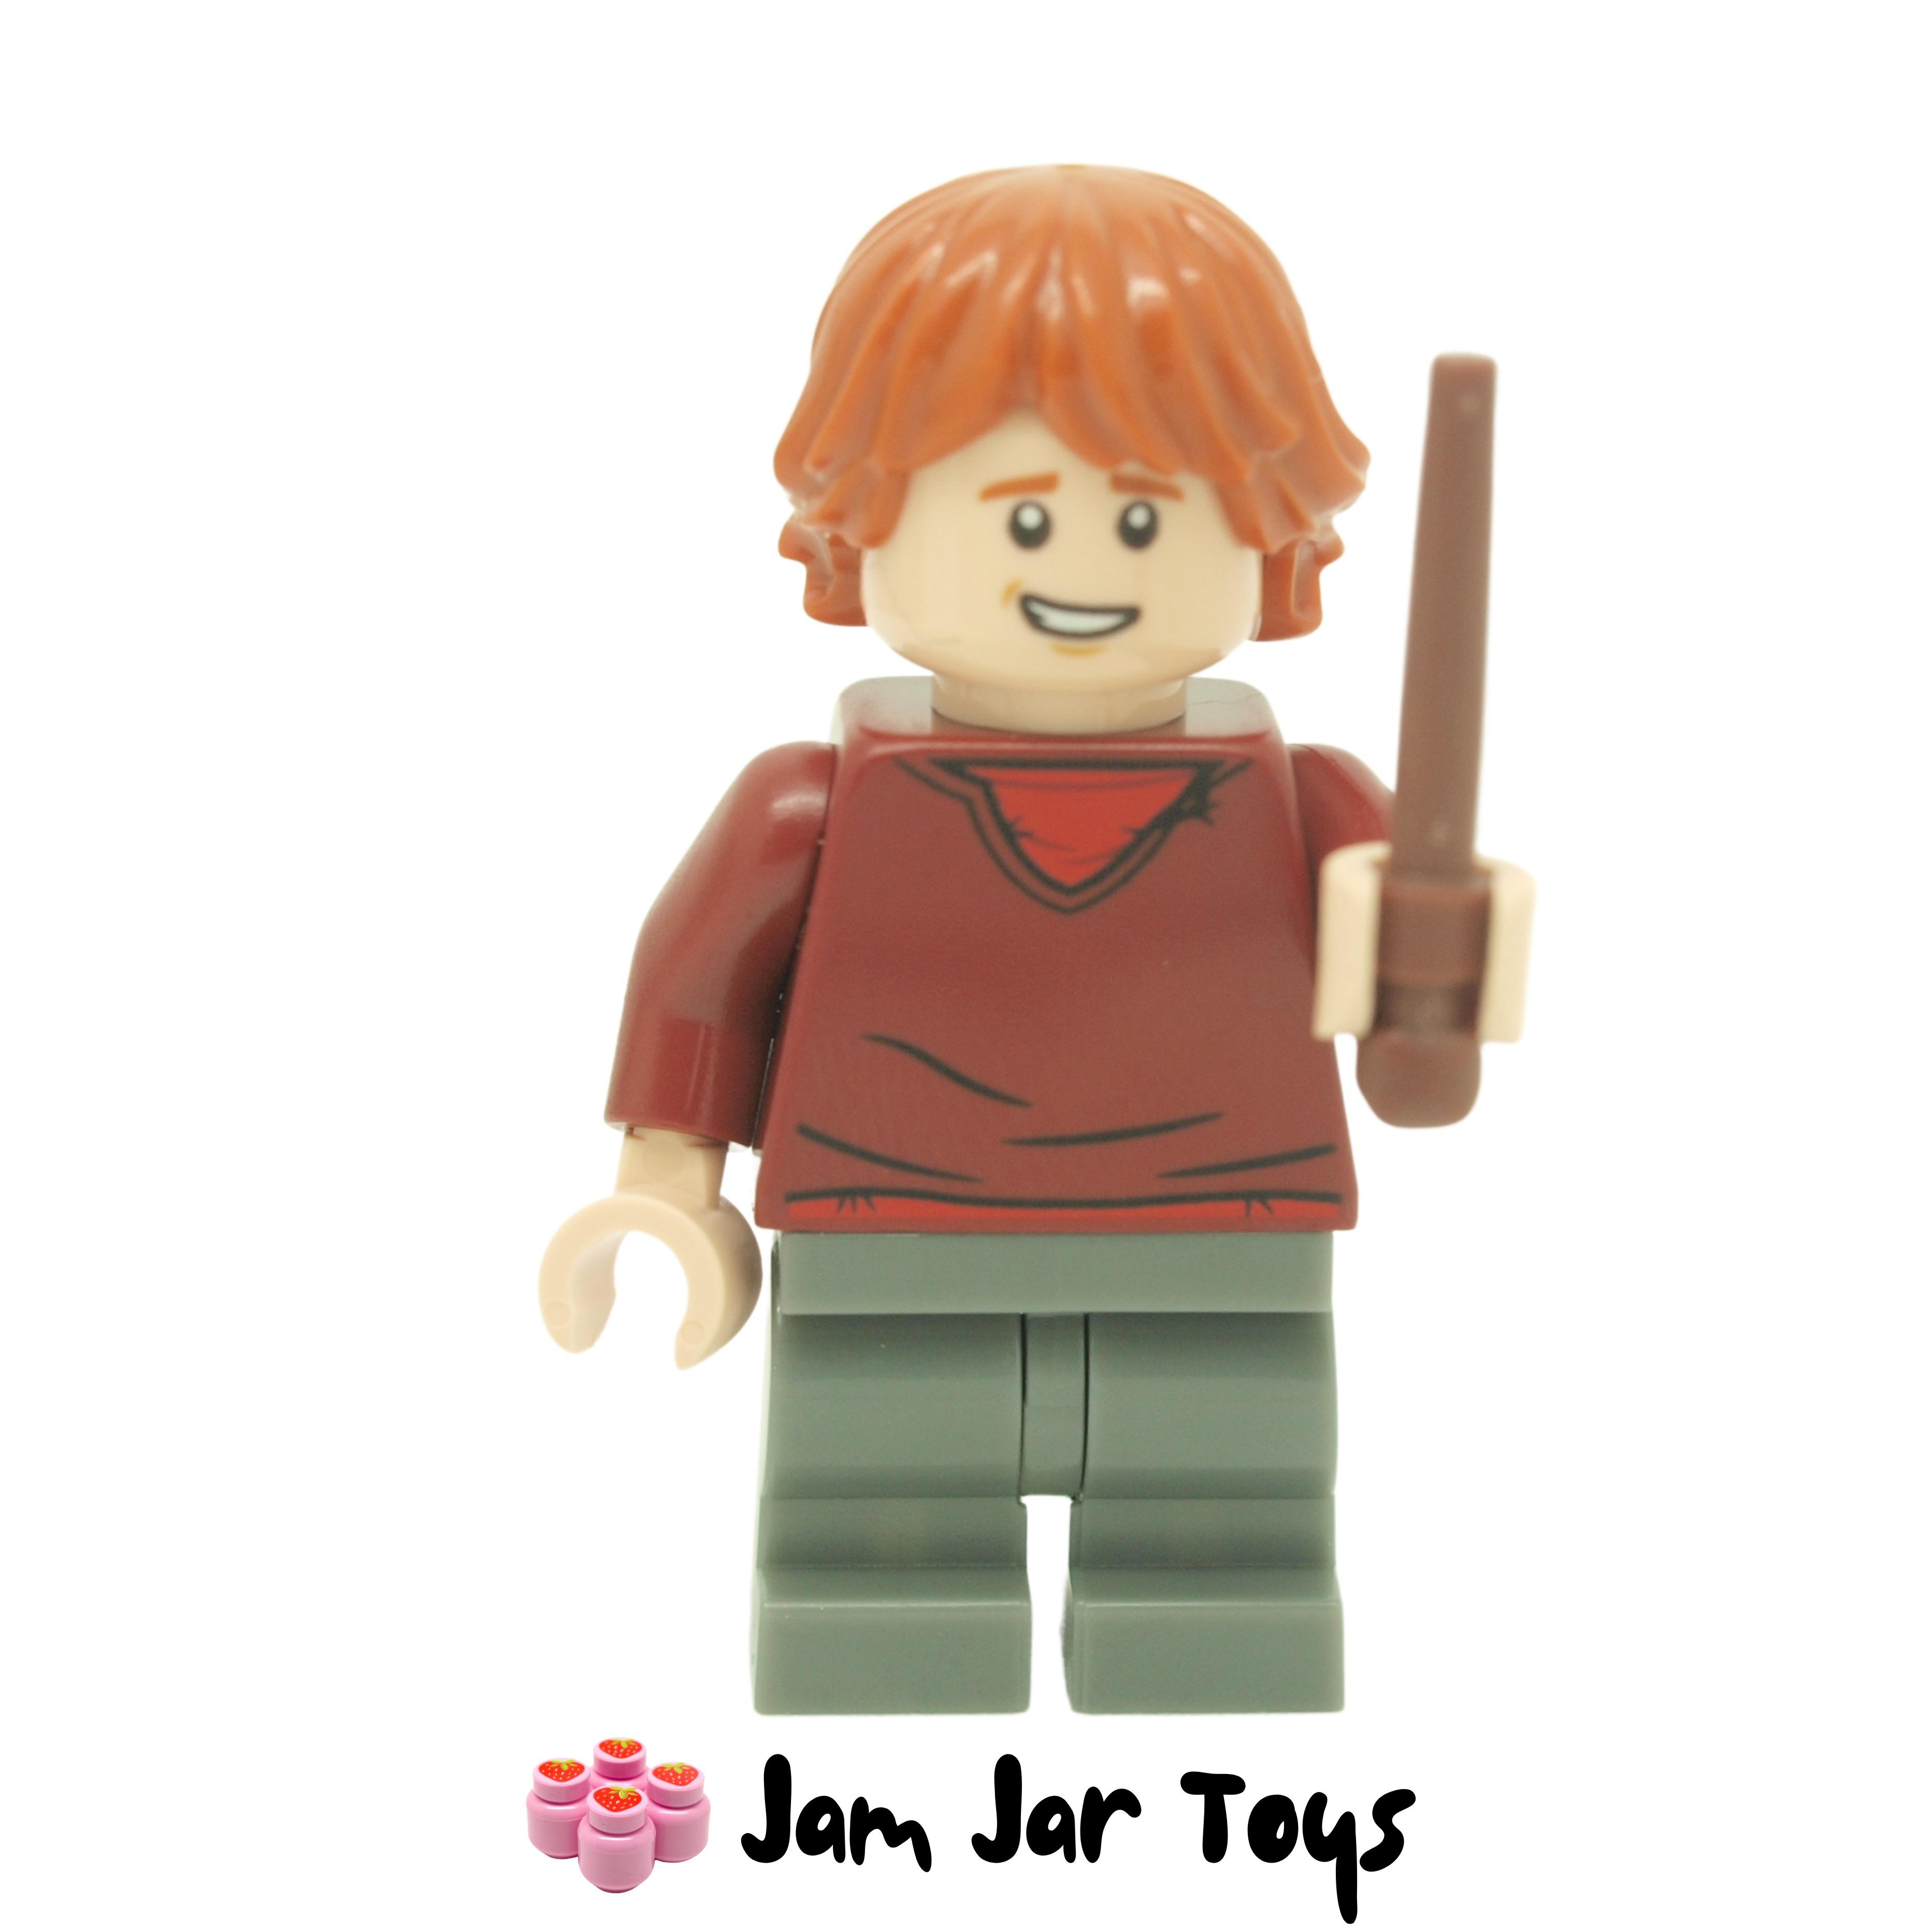 Ron Weasley 20th Anniversary - hp294 LEGO minifigure Harry Potter 76388 NEW 